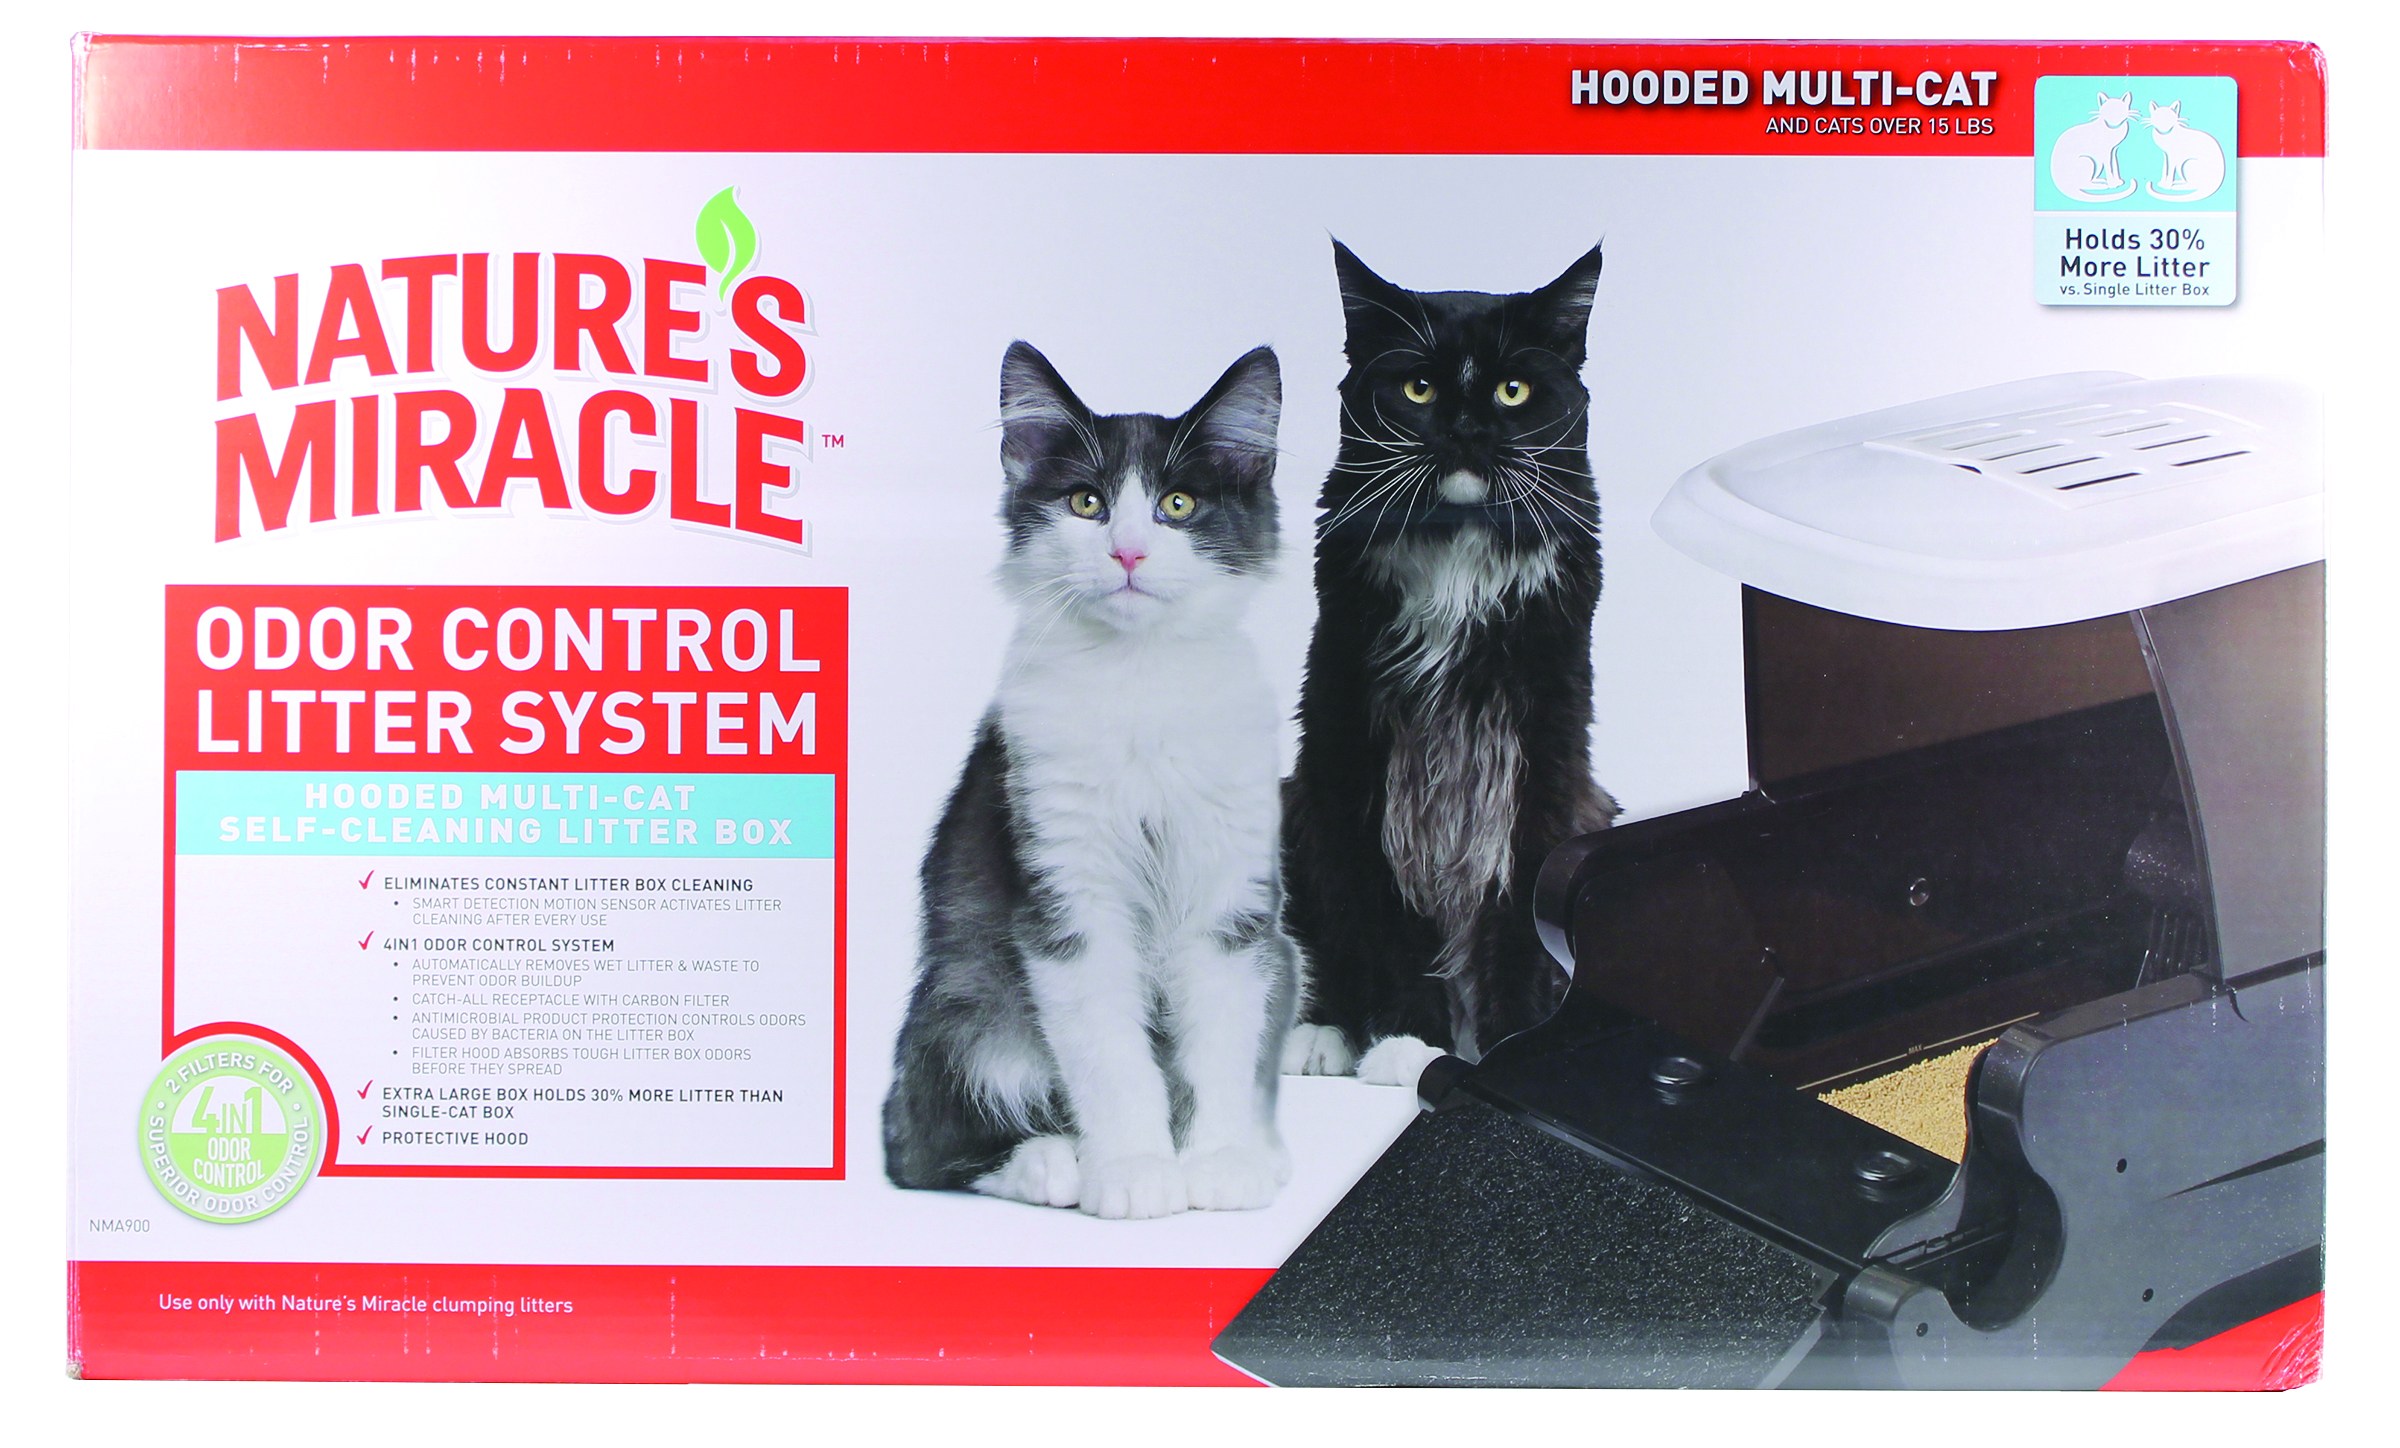 HOODED MULTI-CAT SELF-CLEANING LITTER BOX